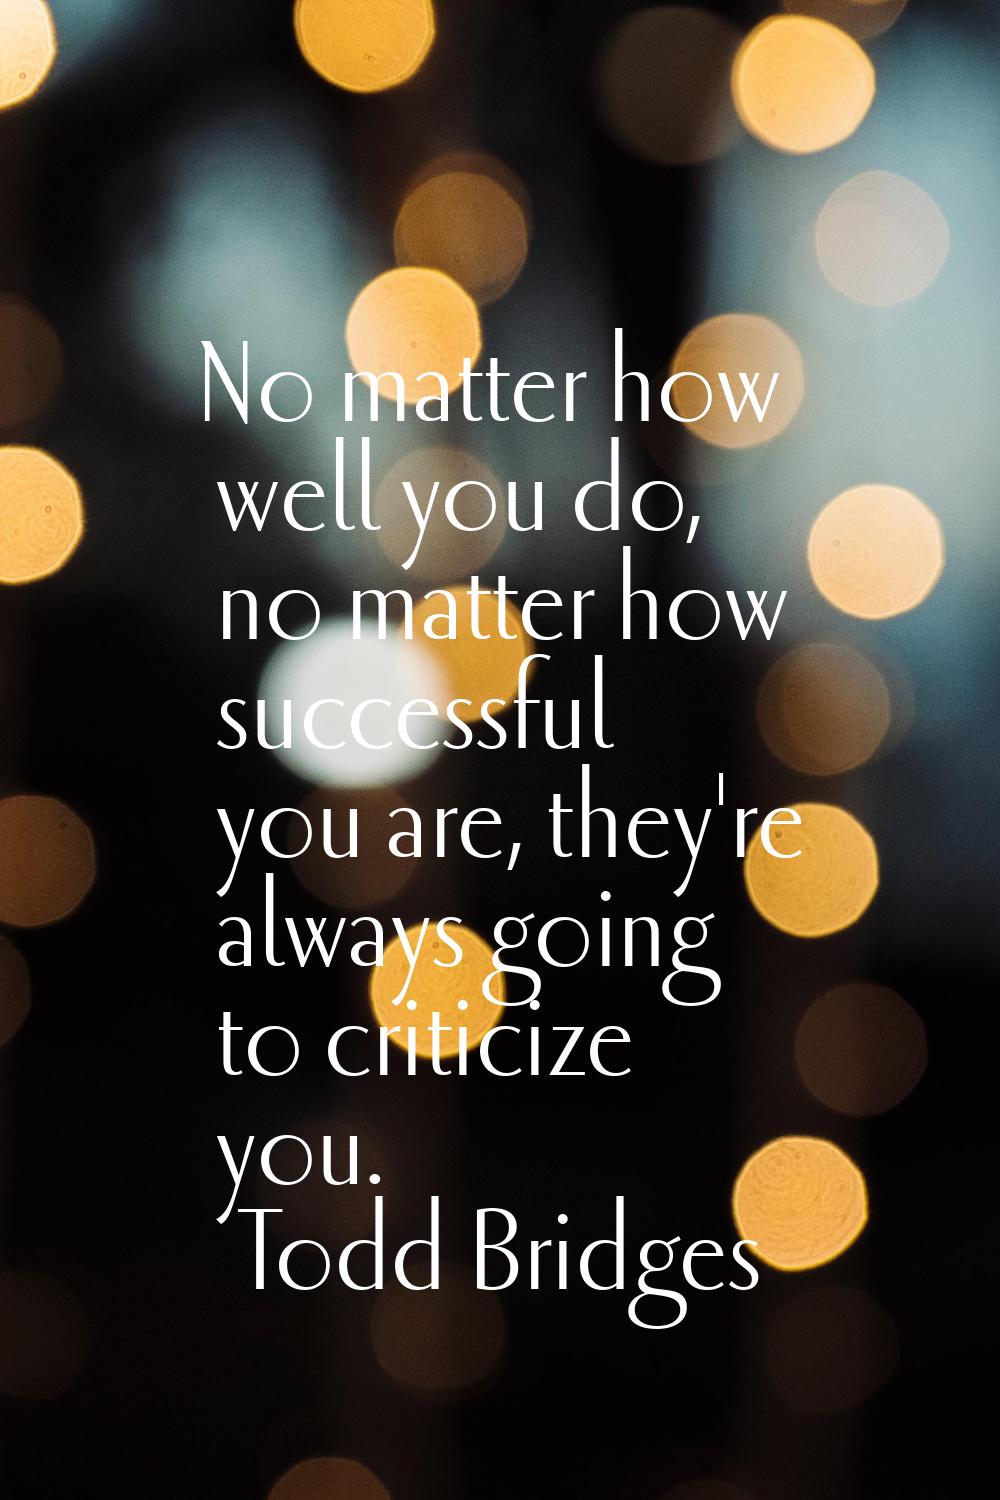 No matter how well you do, no matter how successful you are, they're always going to criticize you.